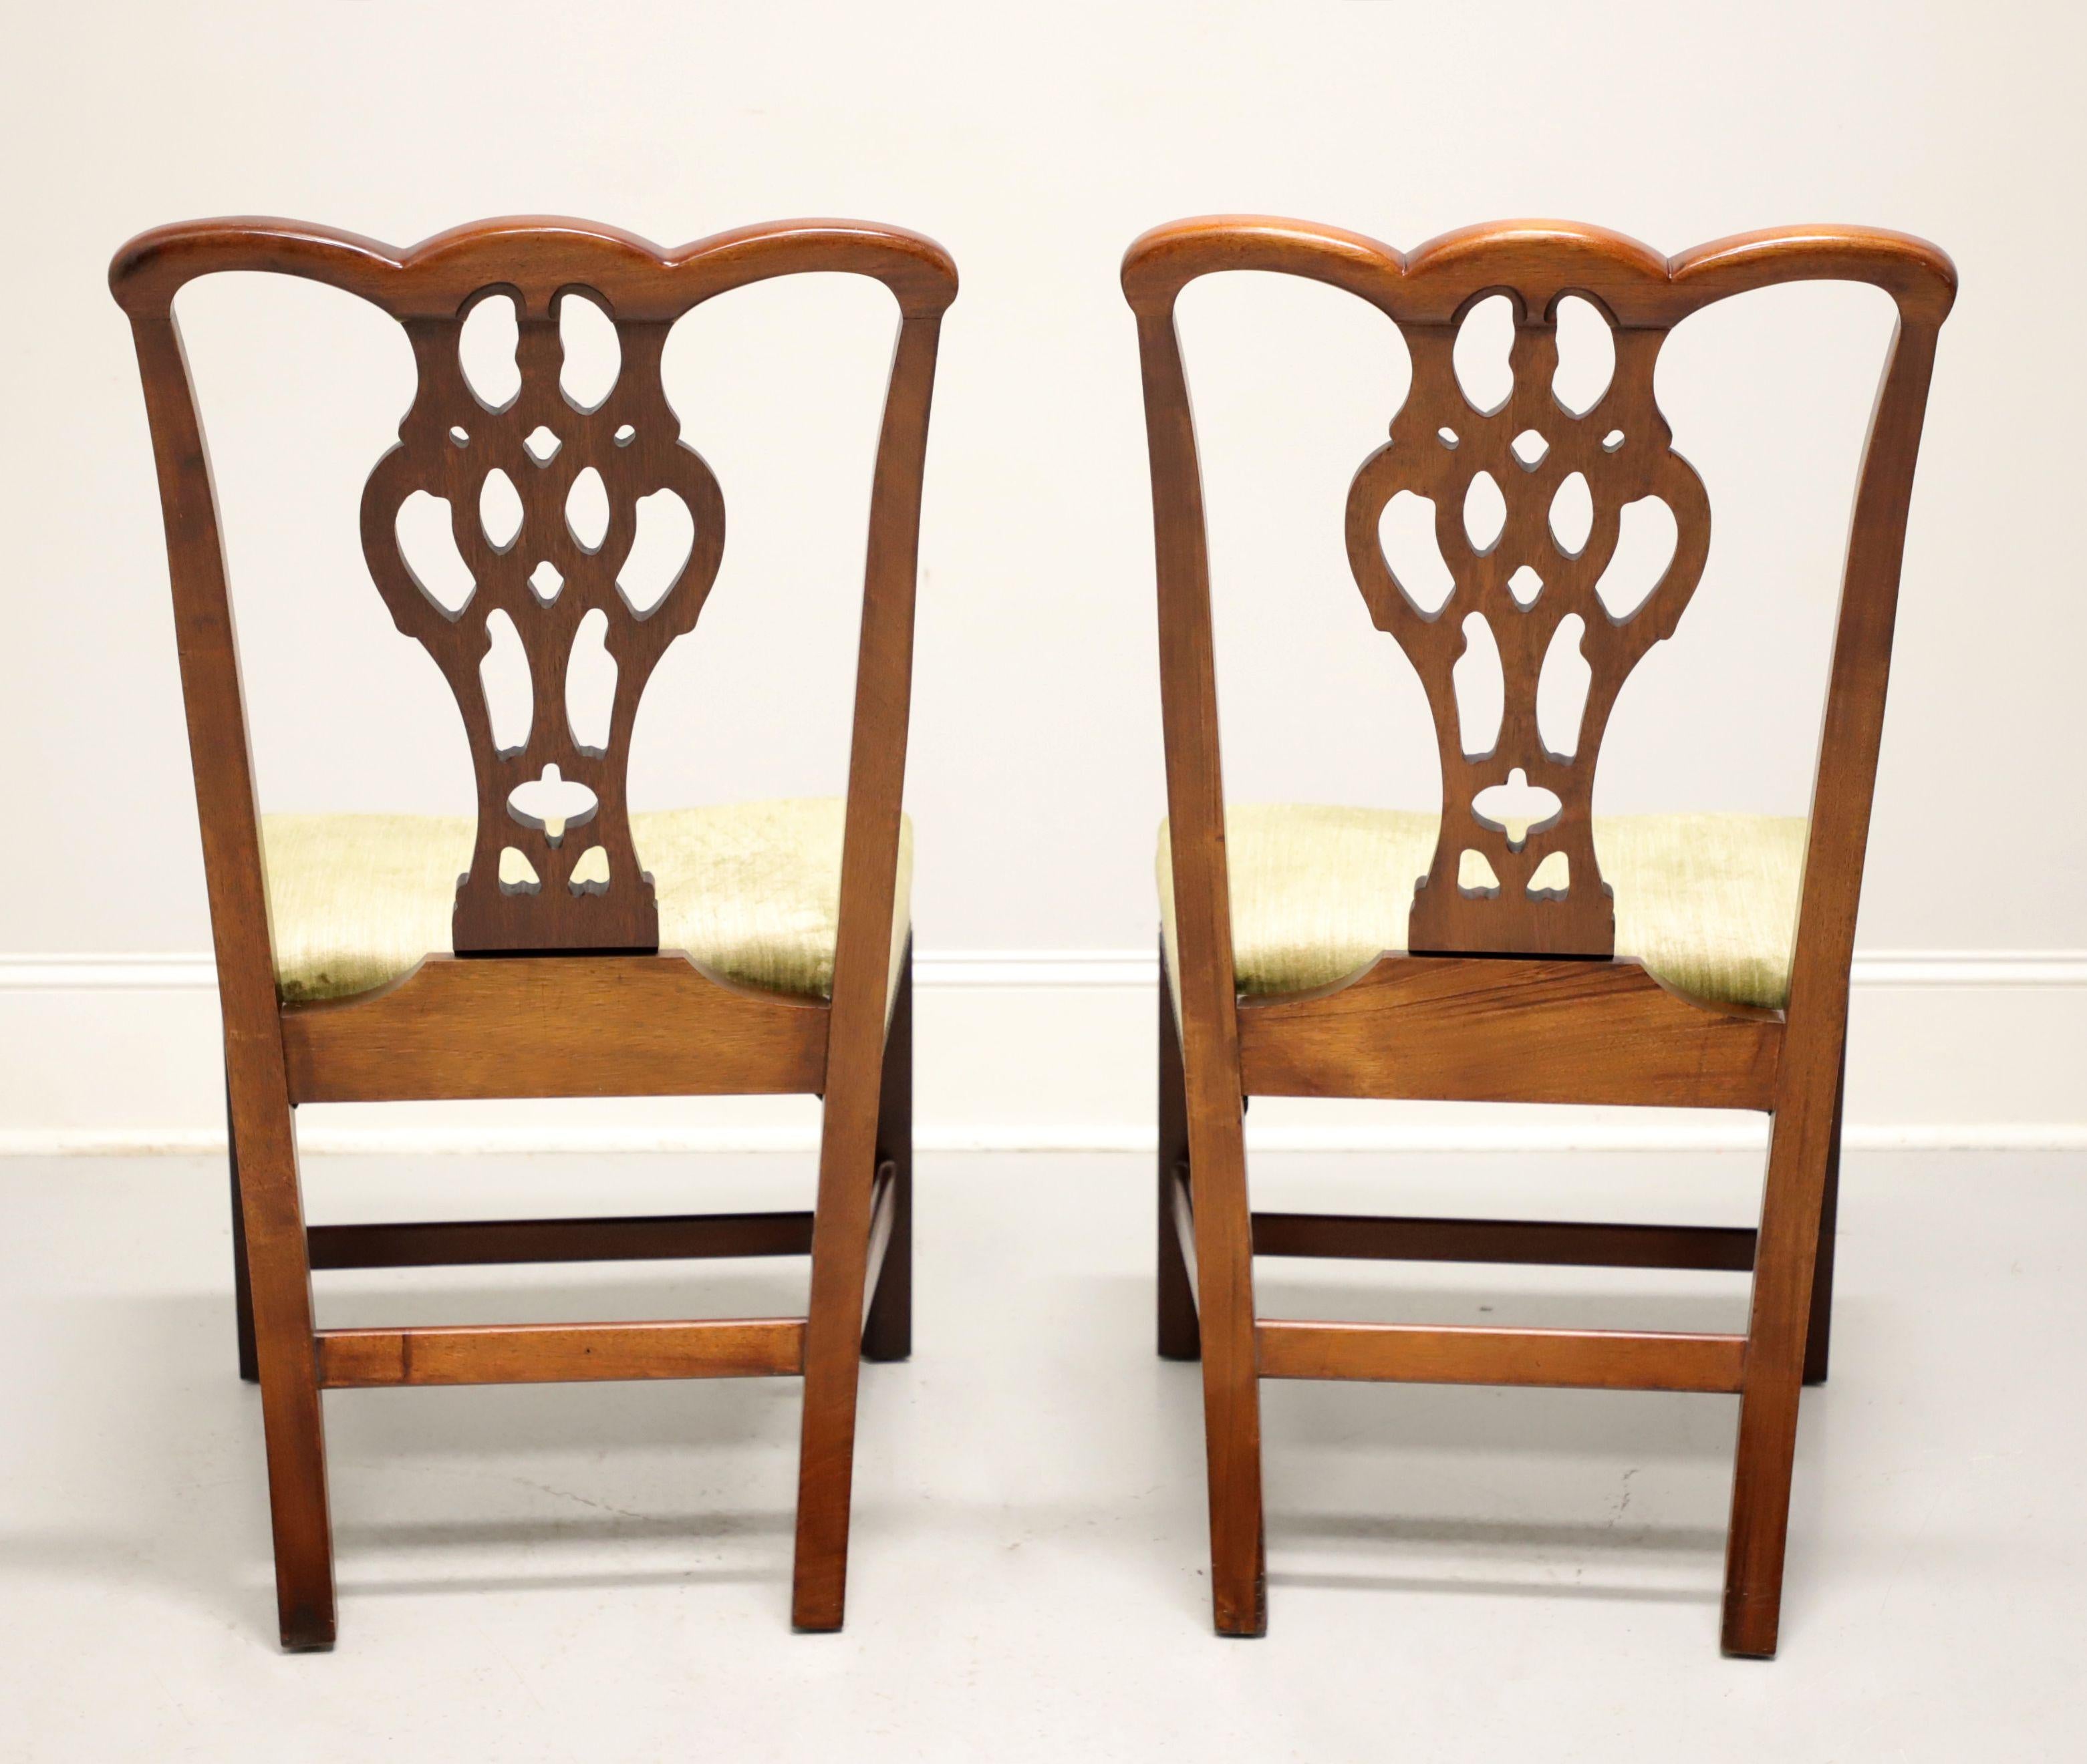 20th Century CRAFTIQUE Mahogany Chippendale Style Straight Leg Dining Side Chairs - Pair C For Sale